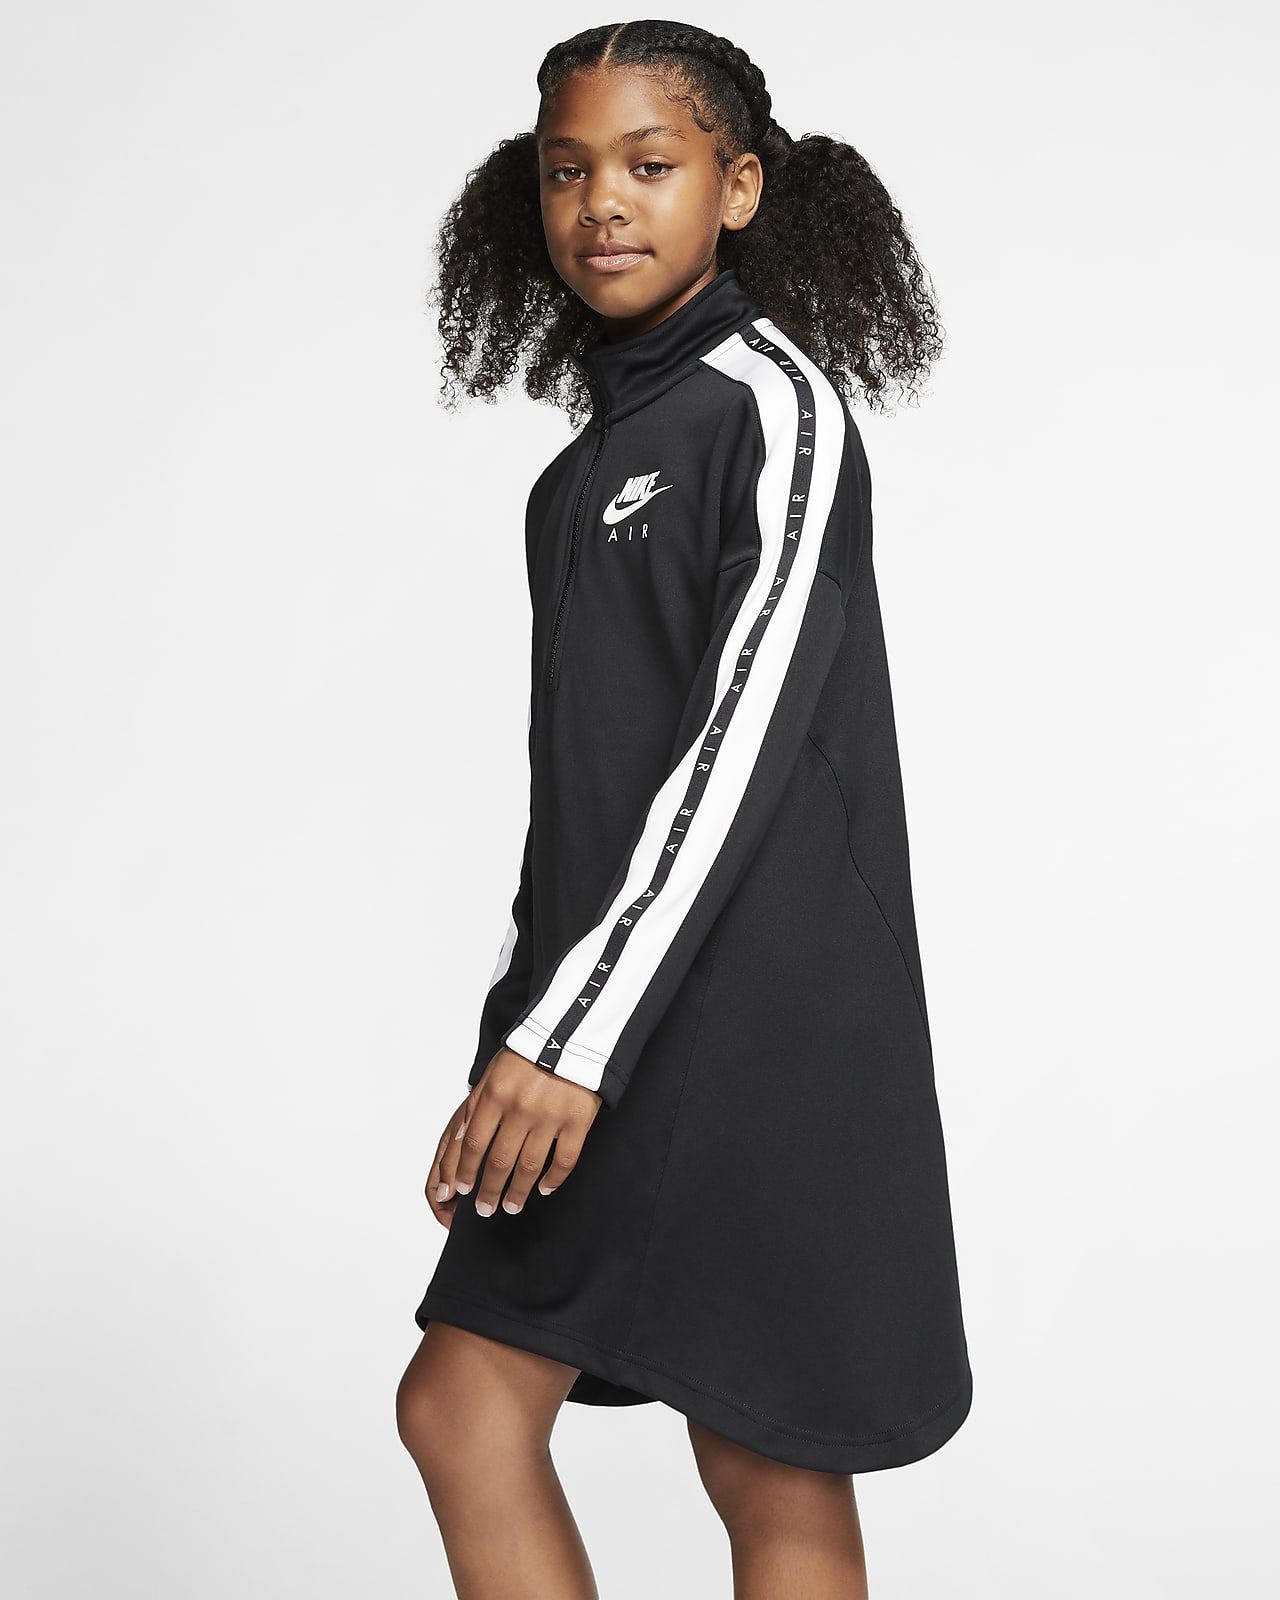 nike for girls clothes